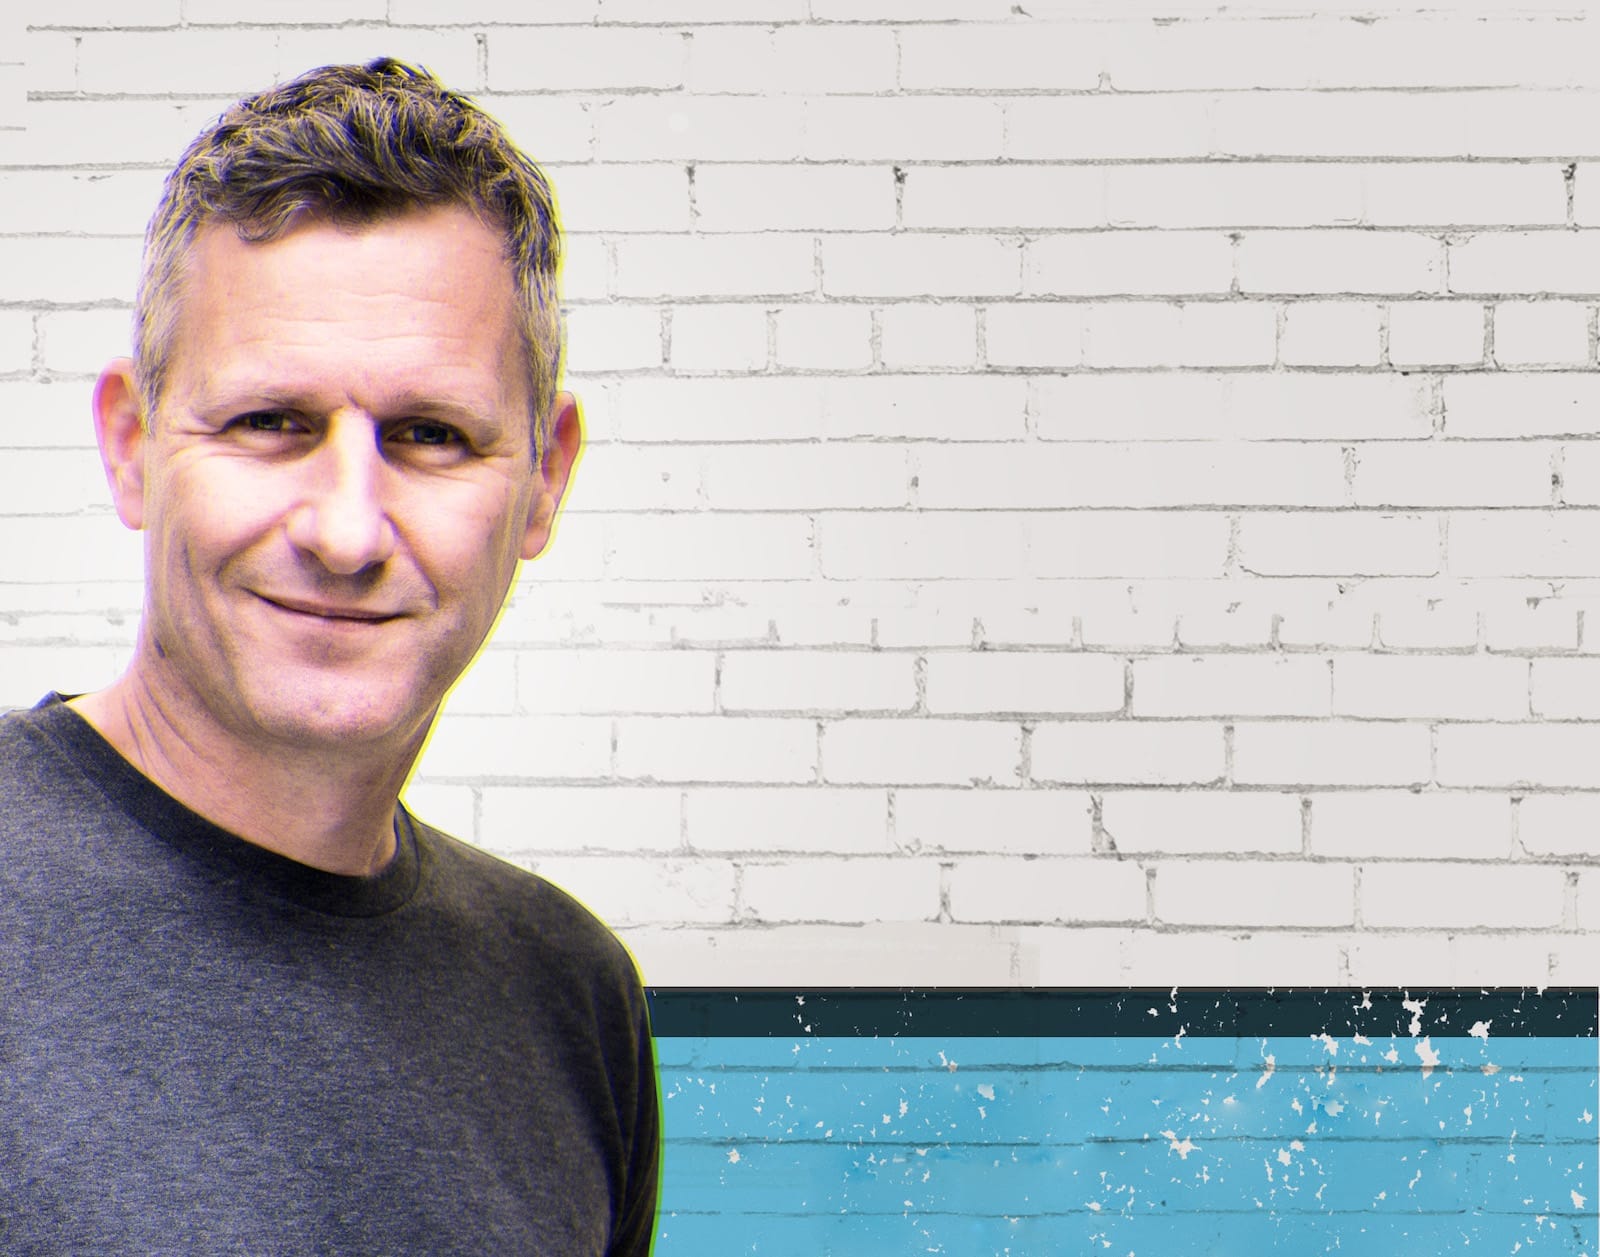 Comedian Adam Hills poses to the left. He has short grey-brown hair and is wearing a grey t-shirt. The background is a white brick wall with a blue stripe at the bottom.